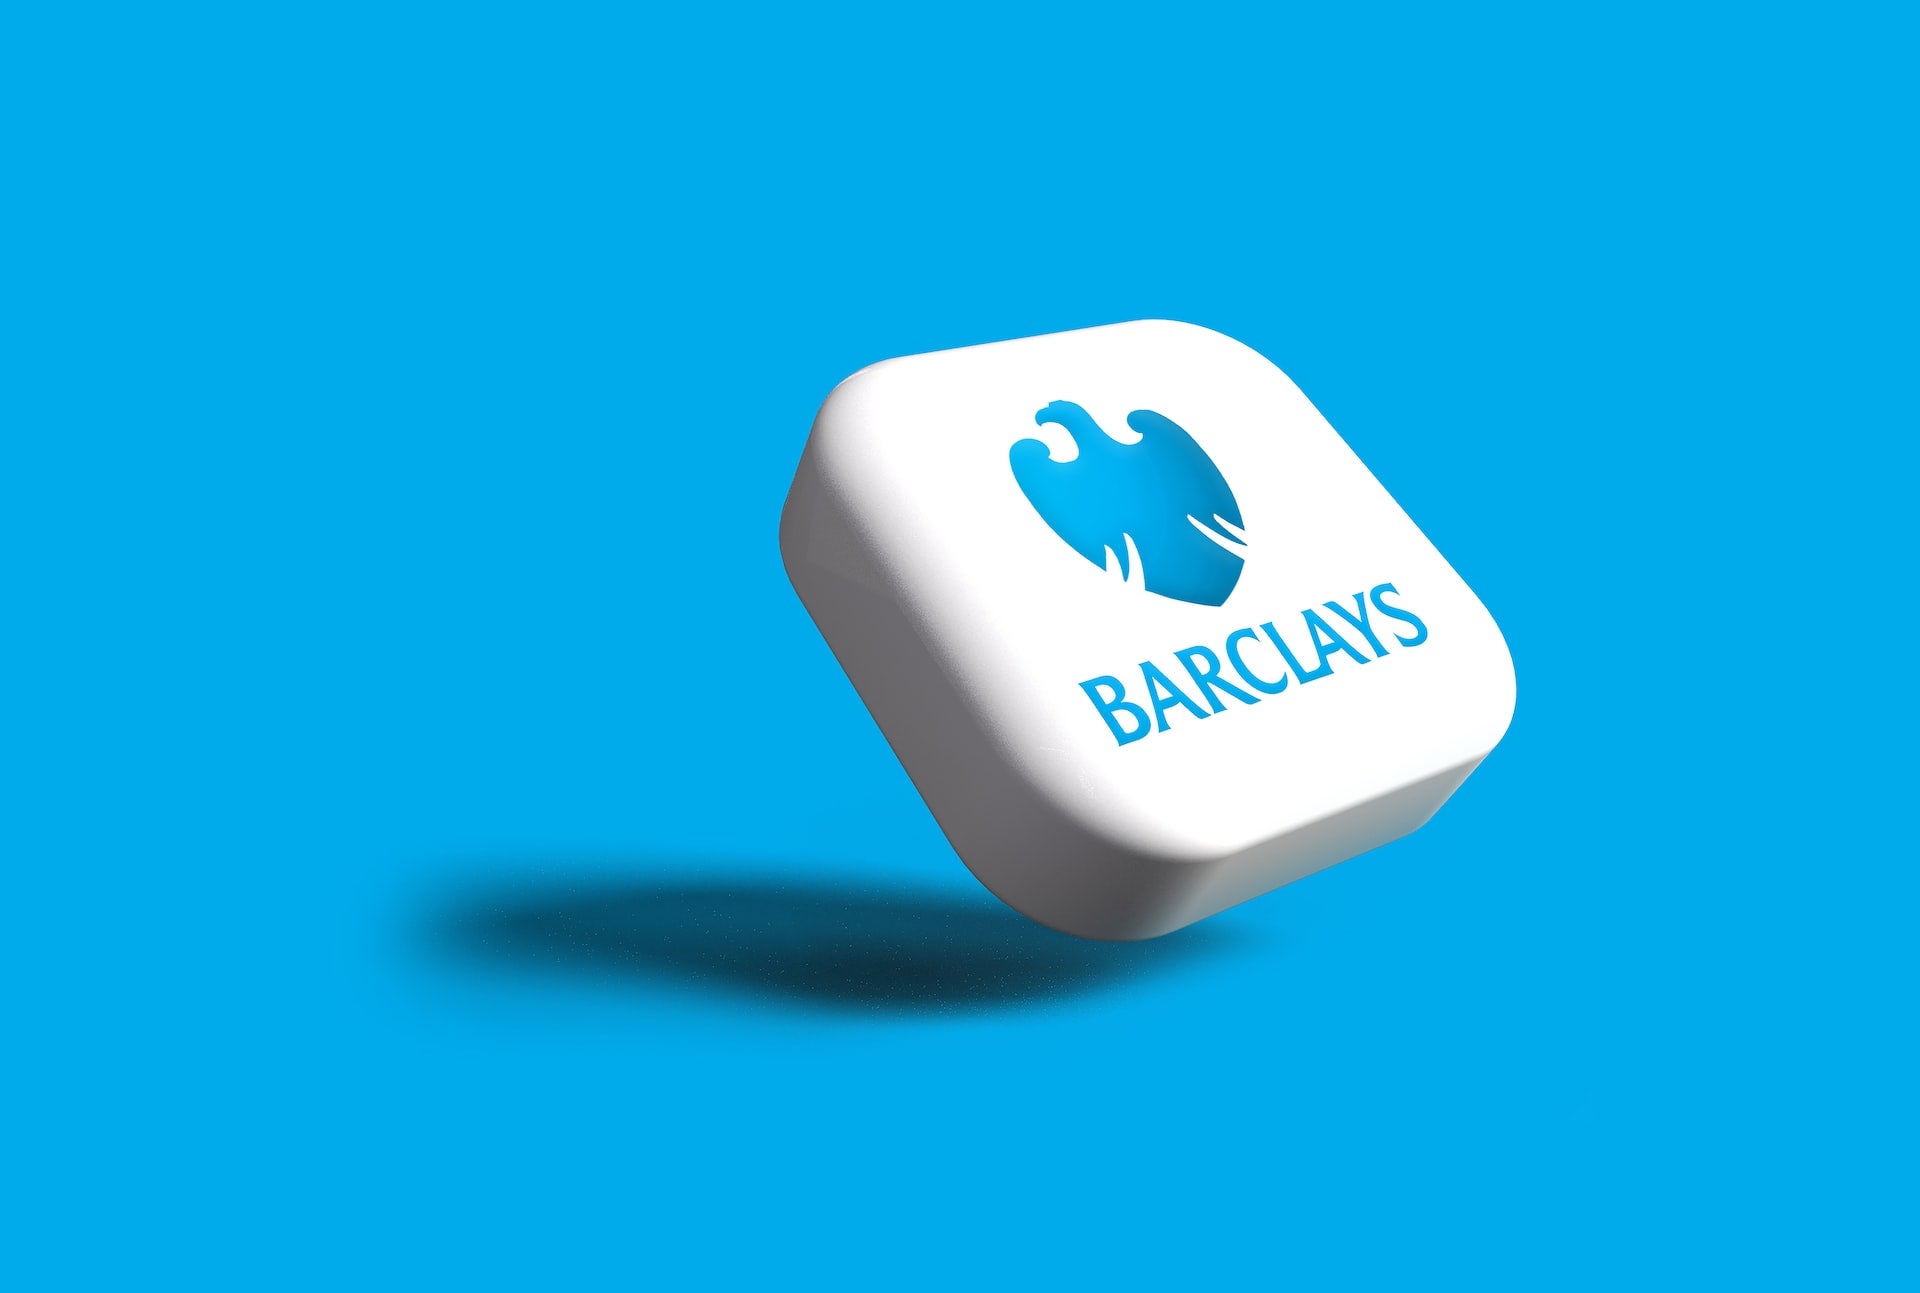 Barclays annual net profit slips 19% to £5bn